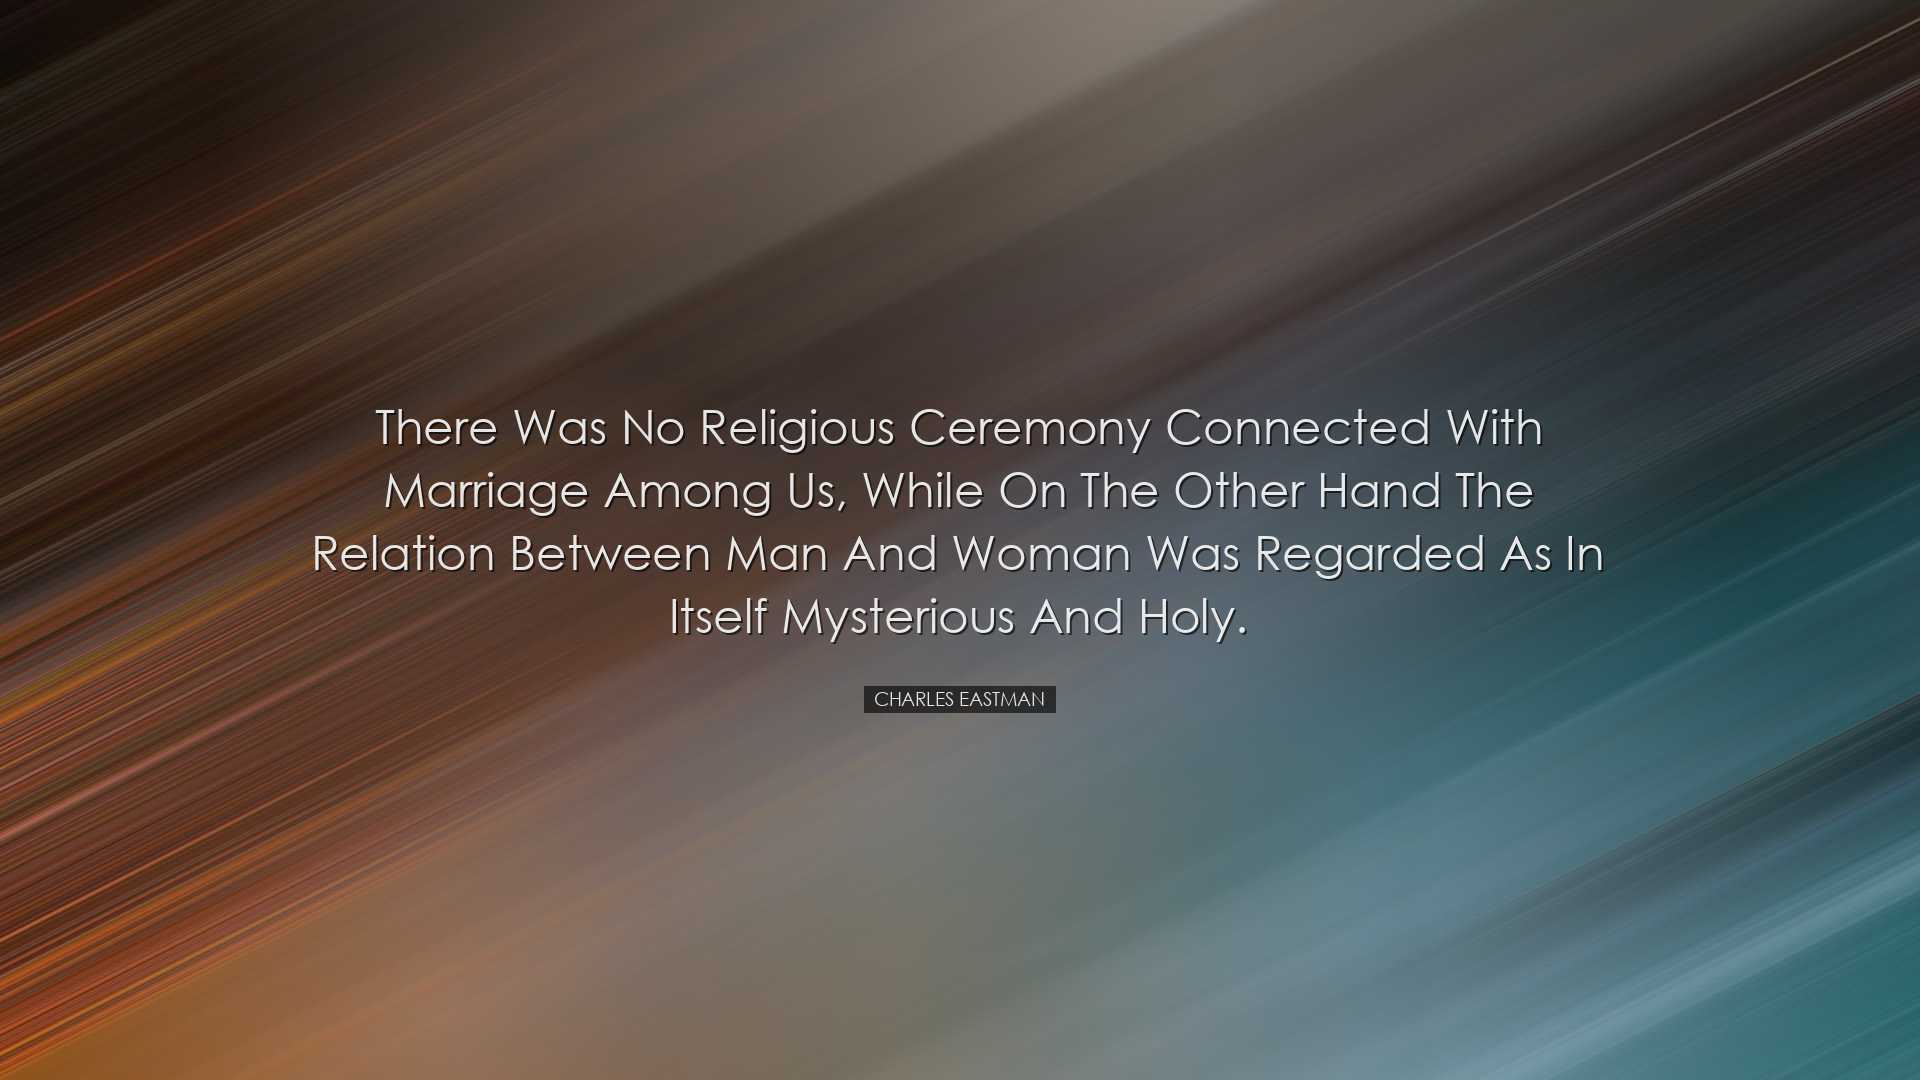 There was no religious ceremony connected with marriage among us,